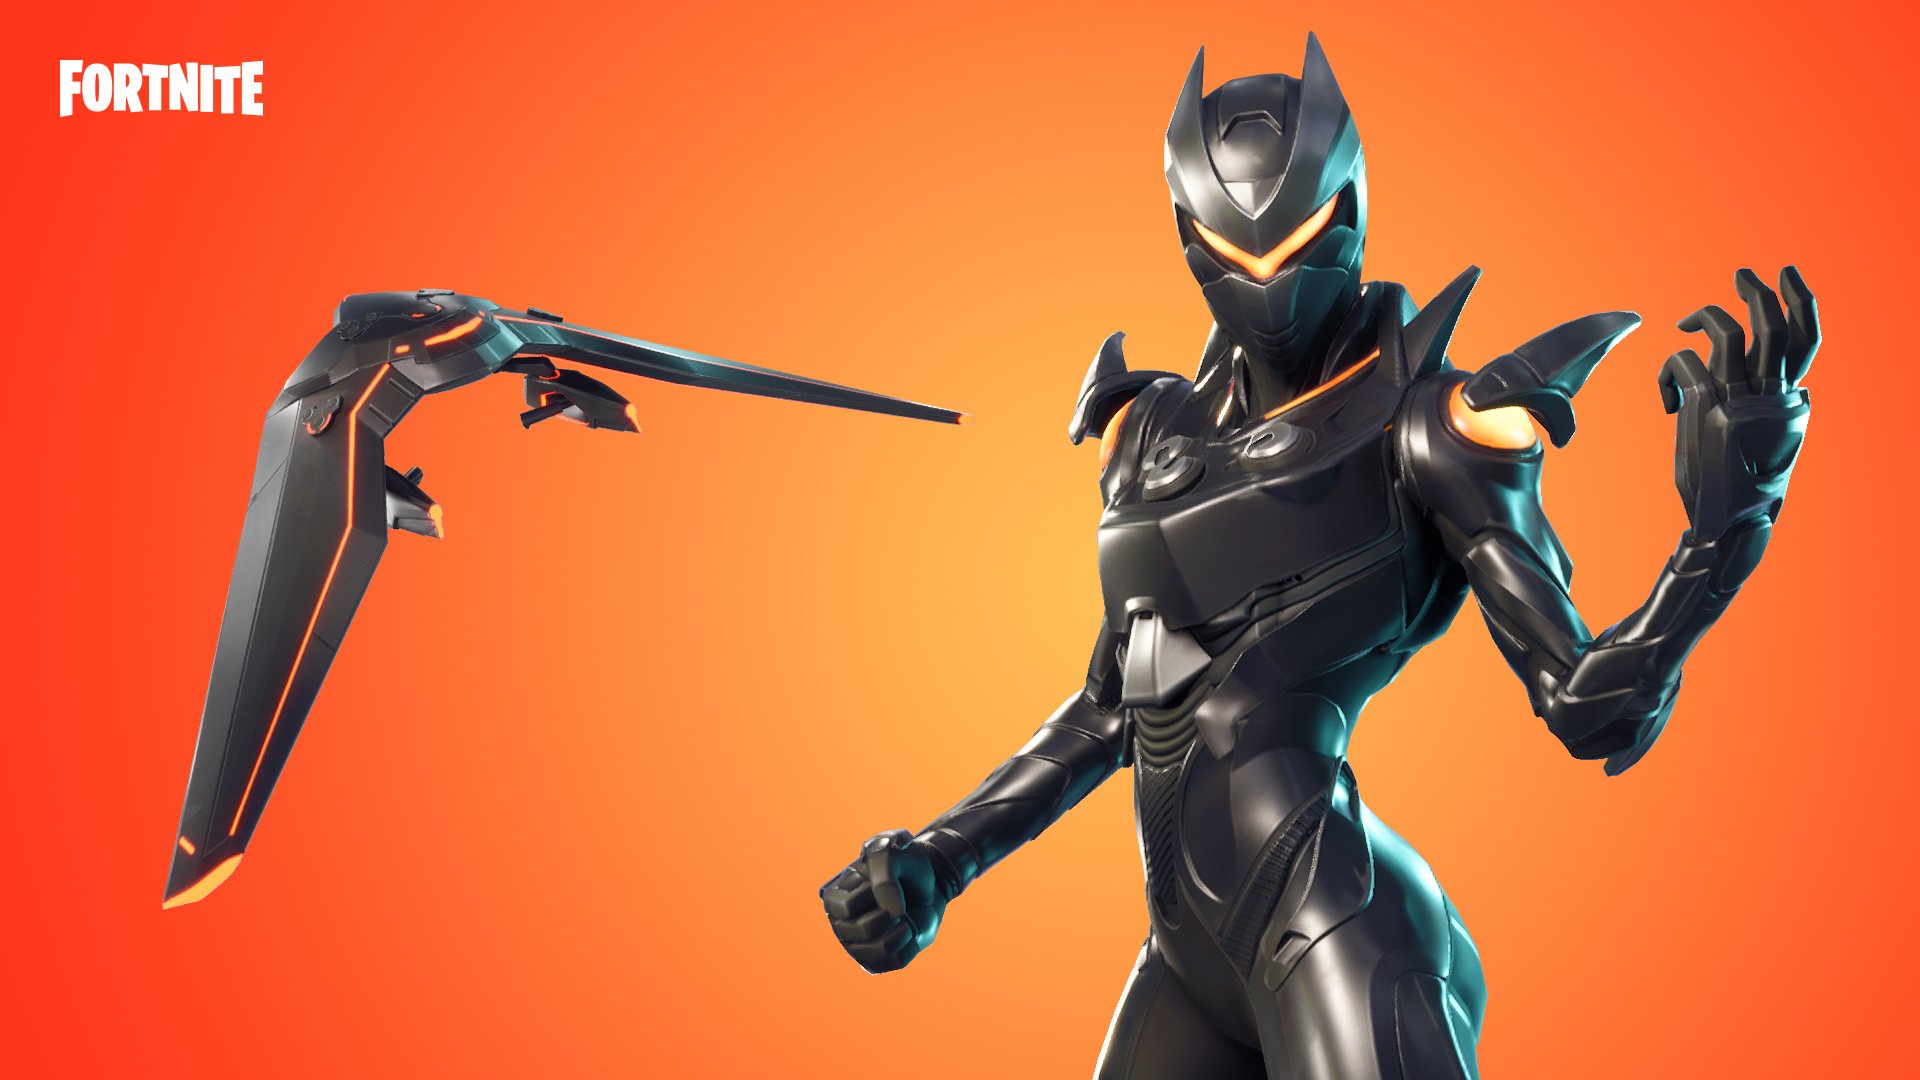 Fortnite on Twitter: "Get vengeance with the new Oblivion ...